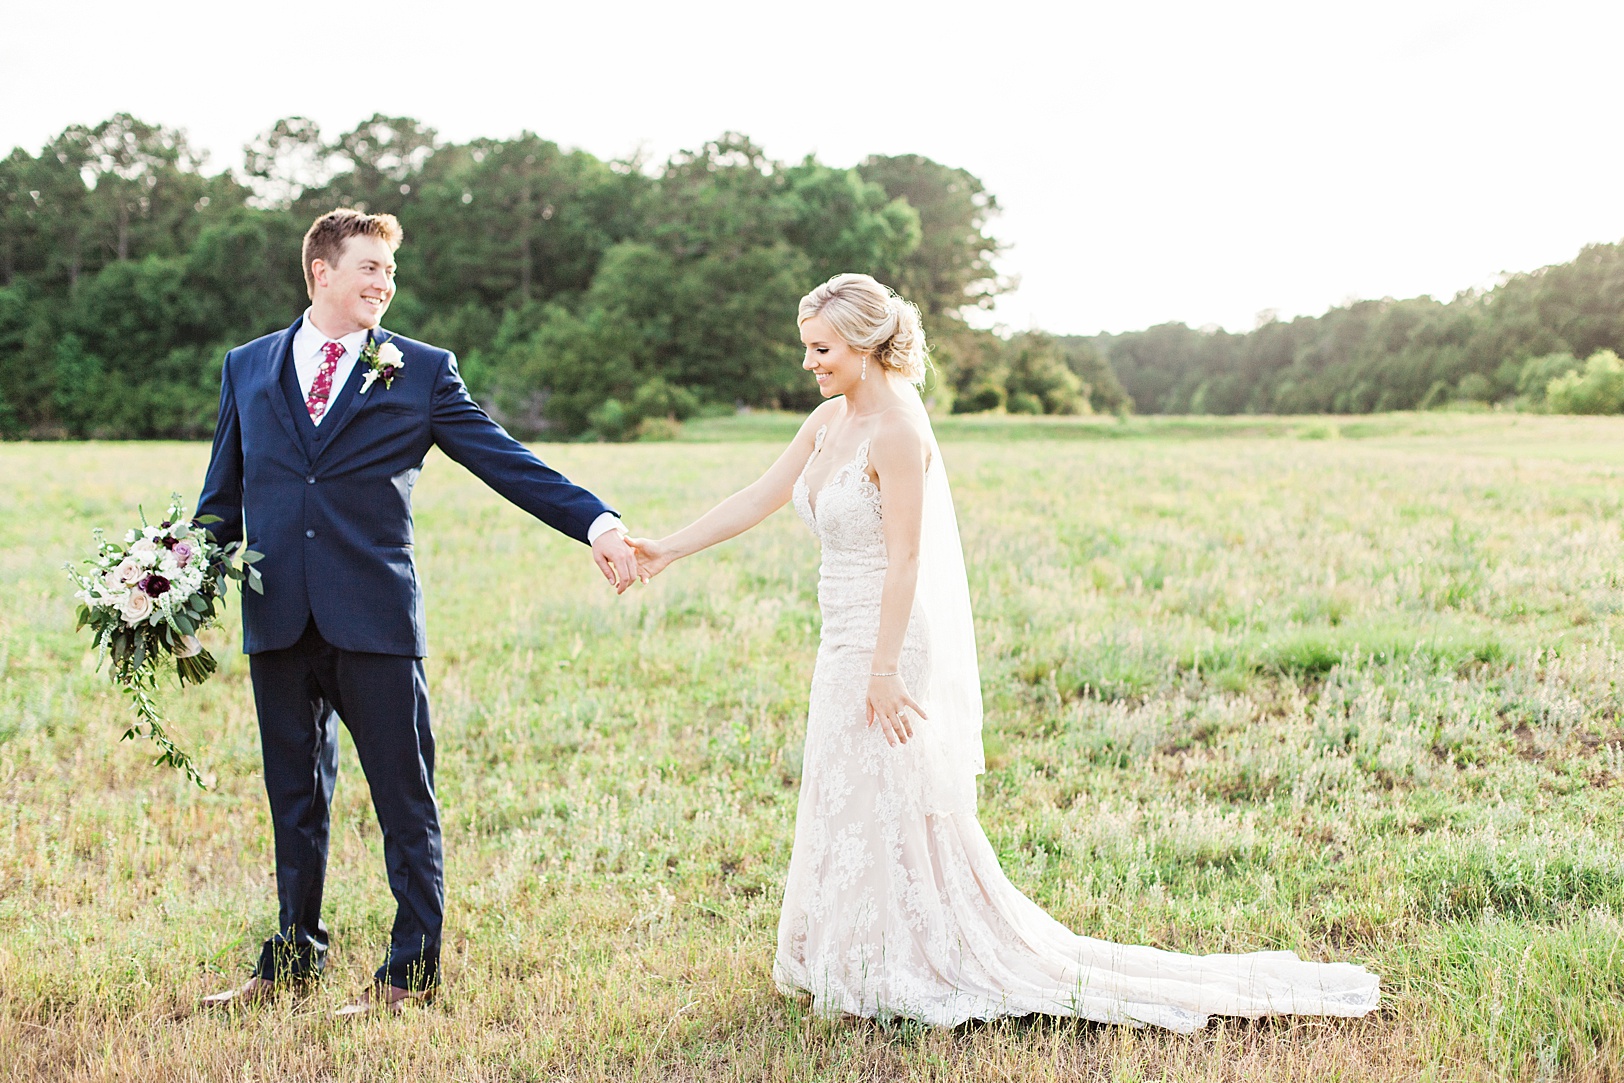 Bride and Groom in a field at Sunset | Kaitlin Scott Photography